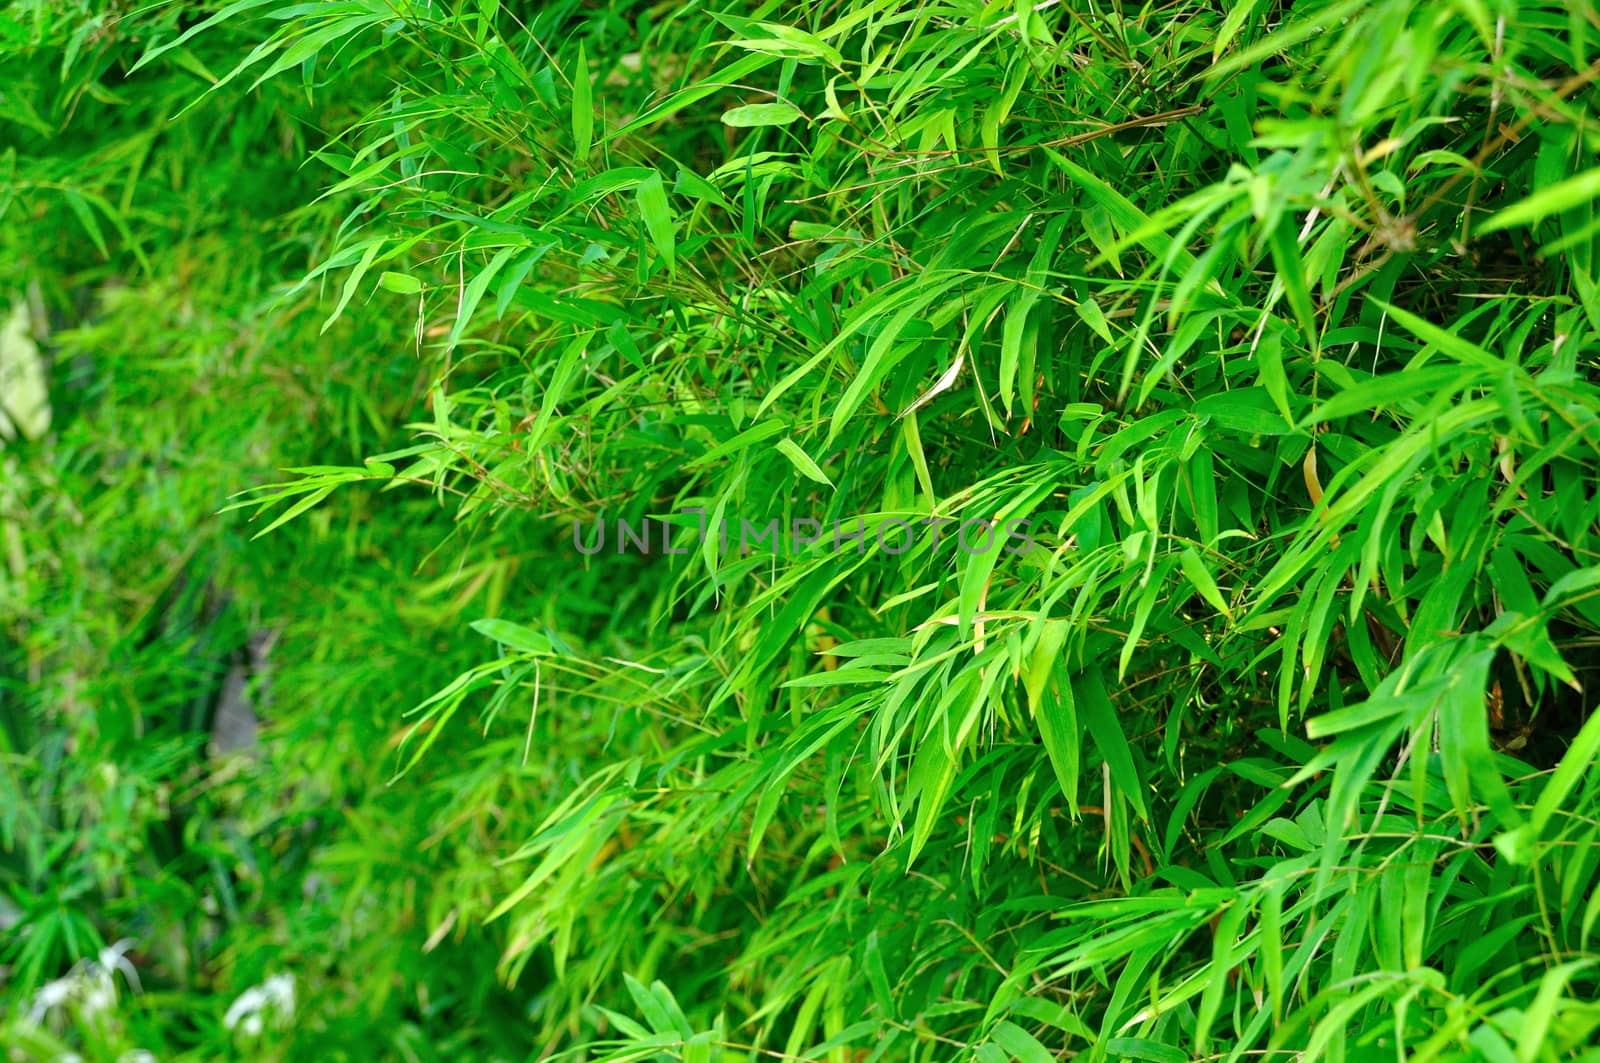 Asian Bamboo Forest Background for use as Web element or any